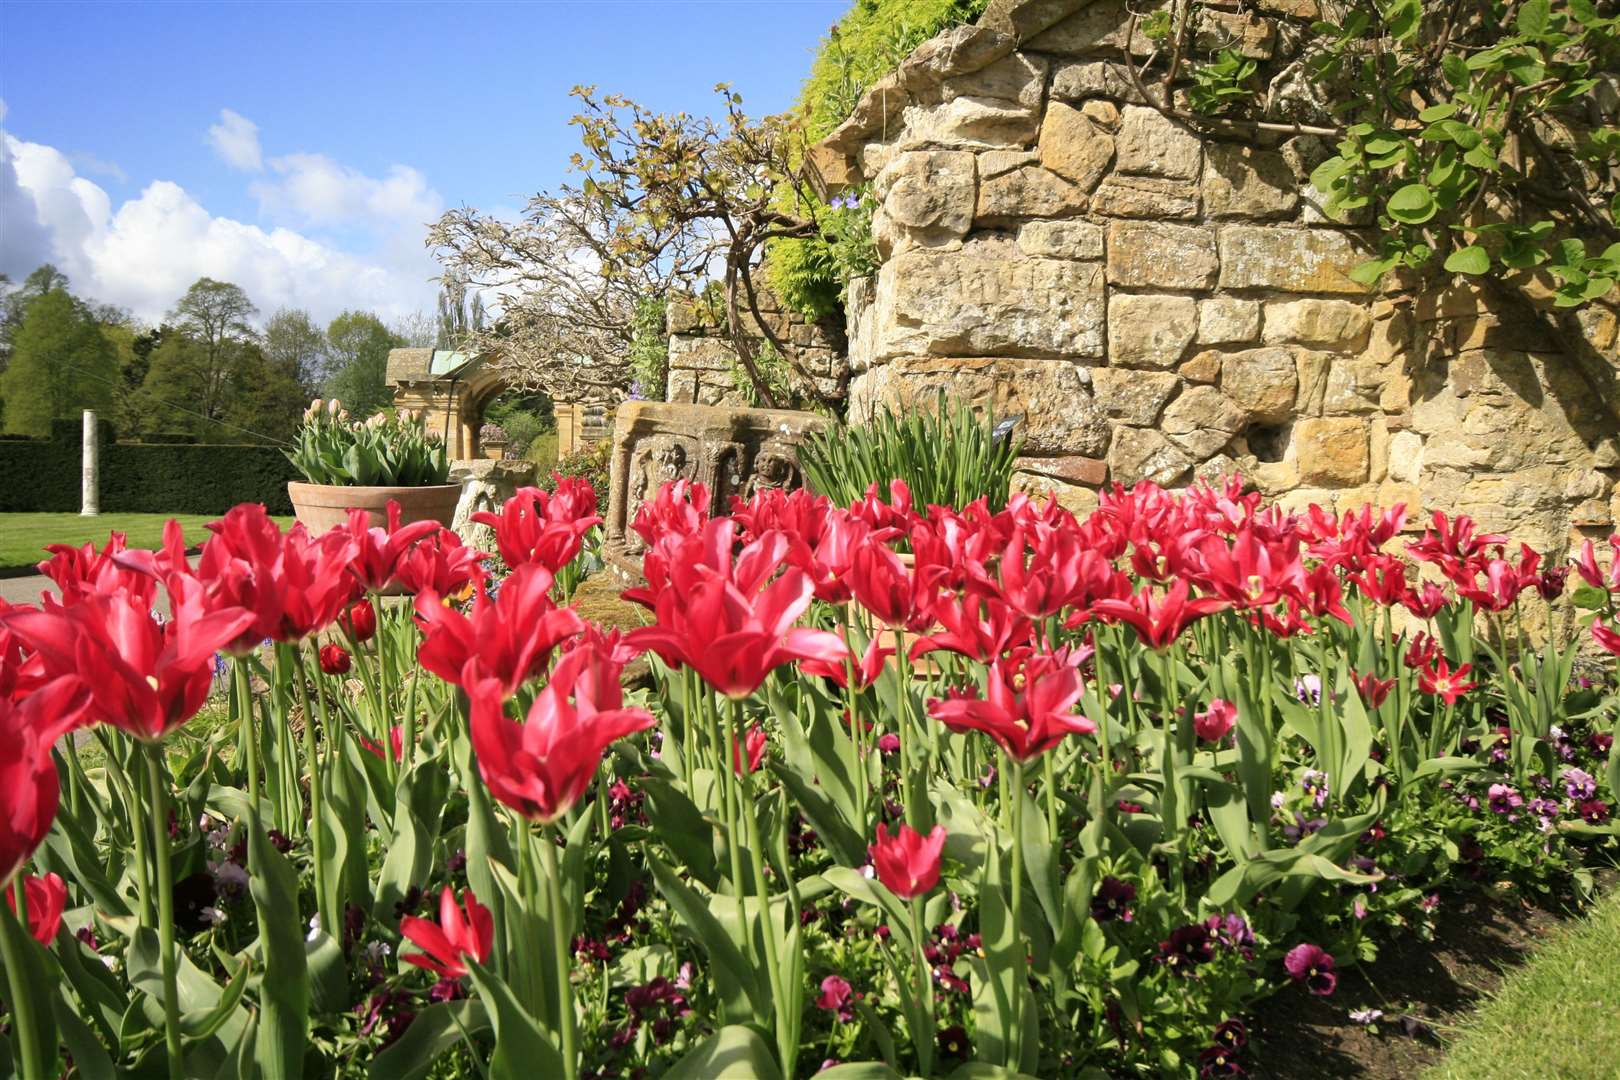 The Tulip Celebrations display at Hever Castle will delight visitors with almost 40,000 colourful tulips Picture: Vikki Rimmer